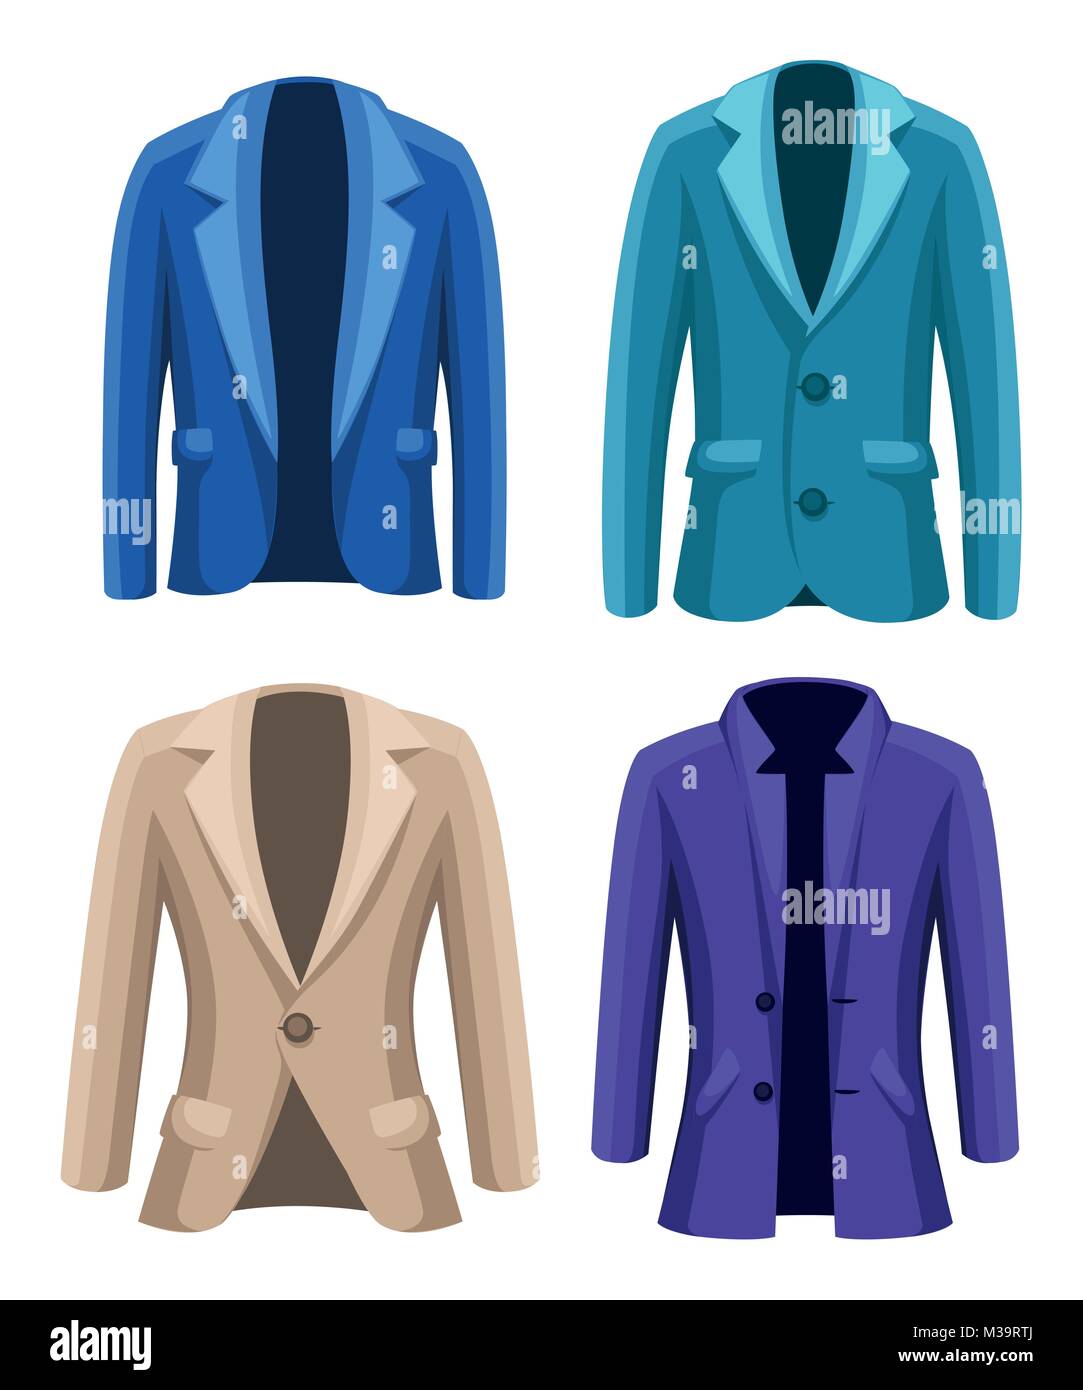 Business suit mens jacket four jackets of different colors and types blue green violet beige vector illustration on white background. Stock Vector